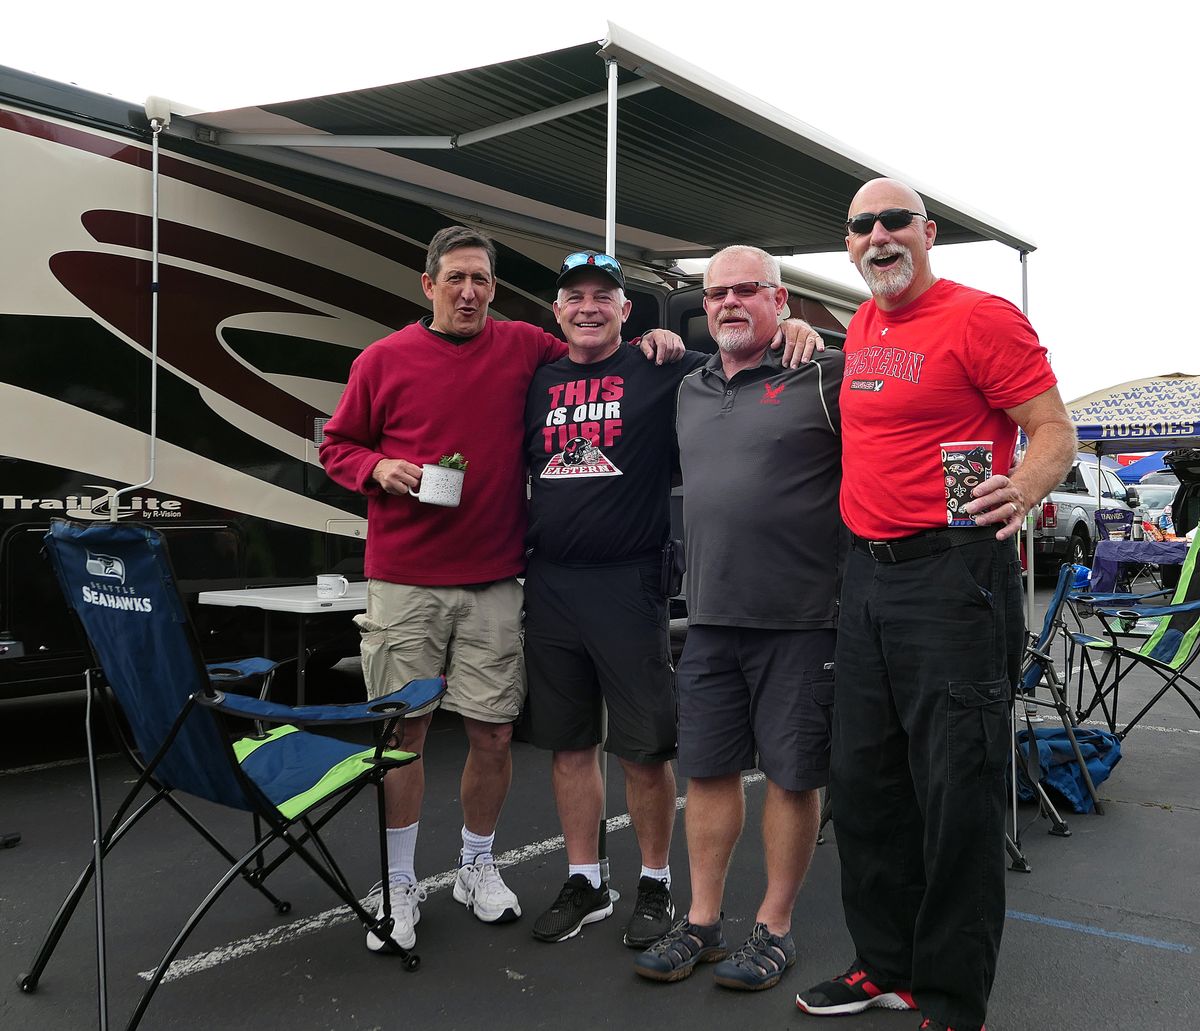 Members of the 1984 EWU baseball team - from left, Brian Snavely, Jim Wasem, Vern Yake and Steve Anderson - party before the opener against the Huskies Saturday in Seattle. (John Nelson)